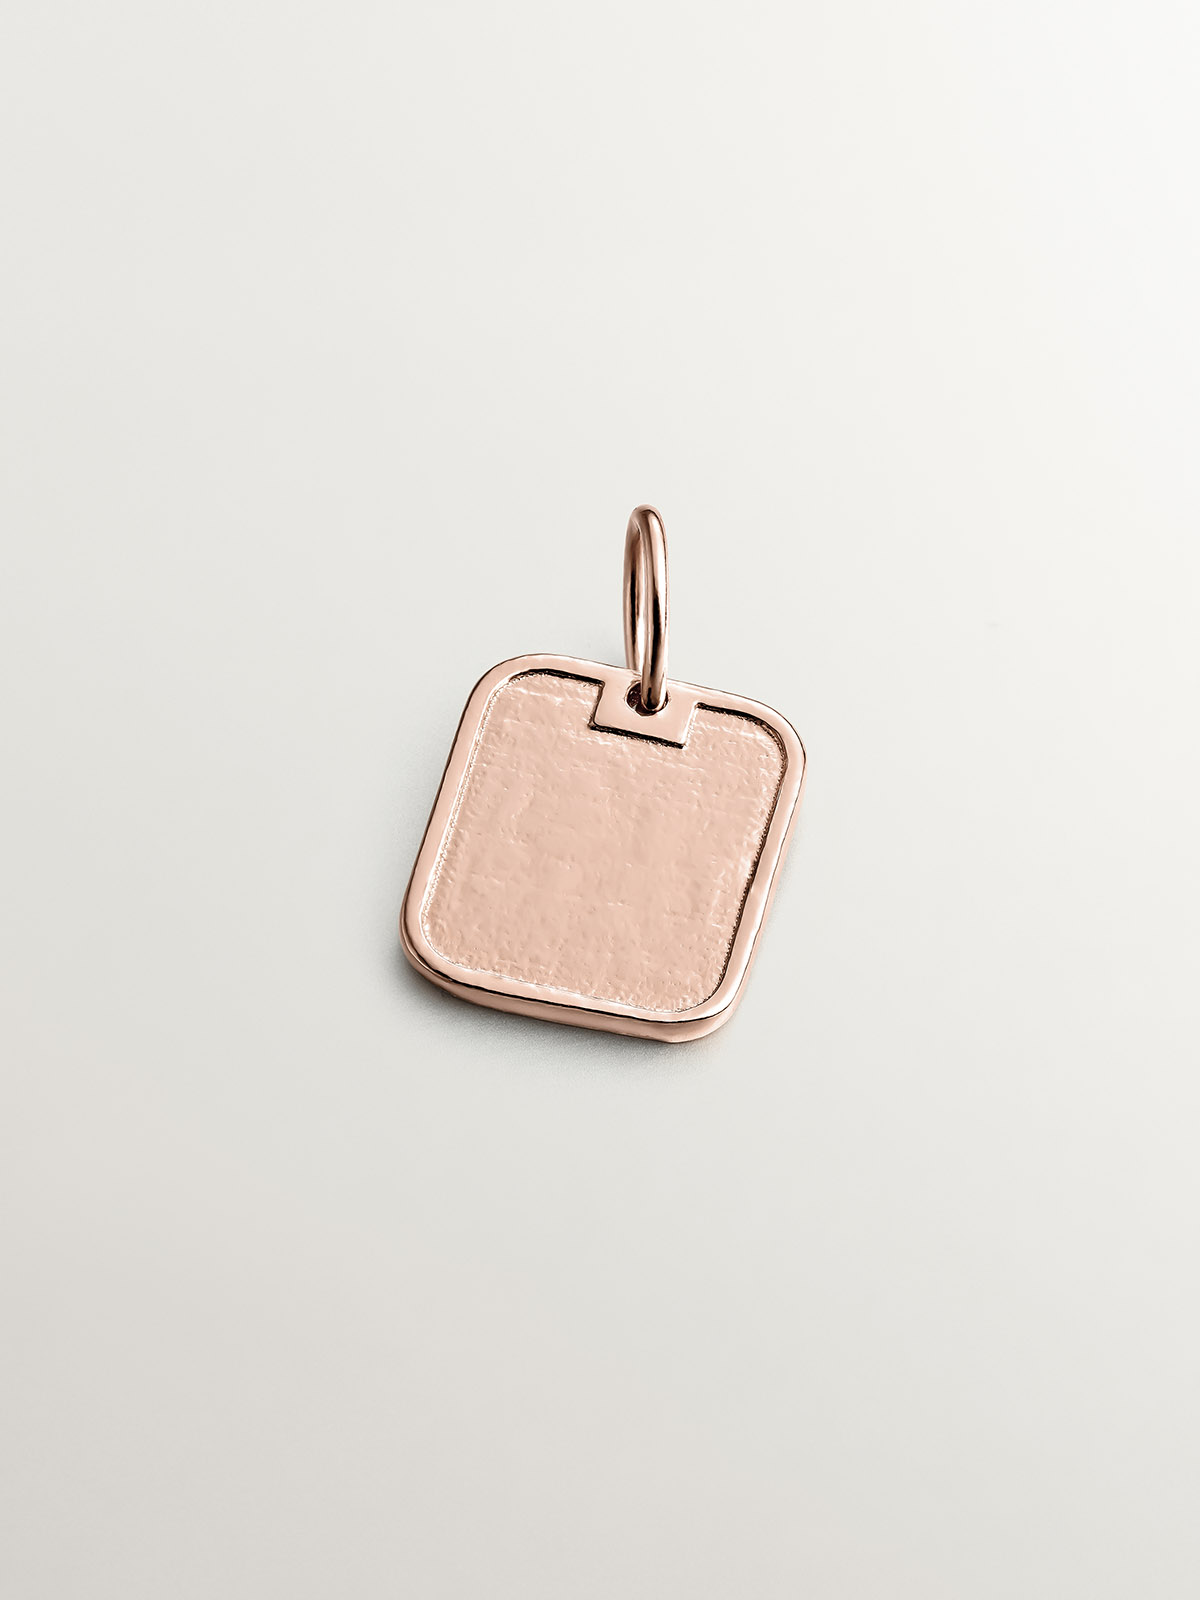 925 silver charm bathed in 18k rose gold with number 6